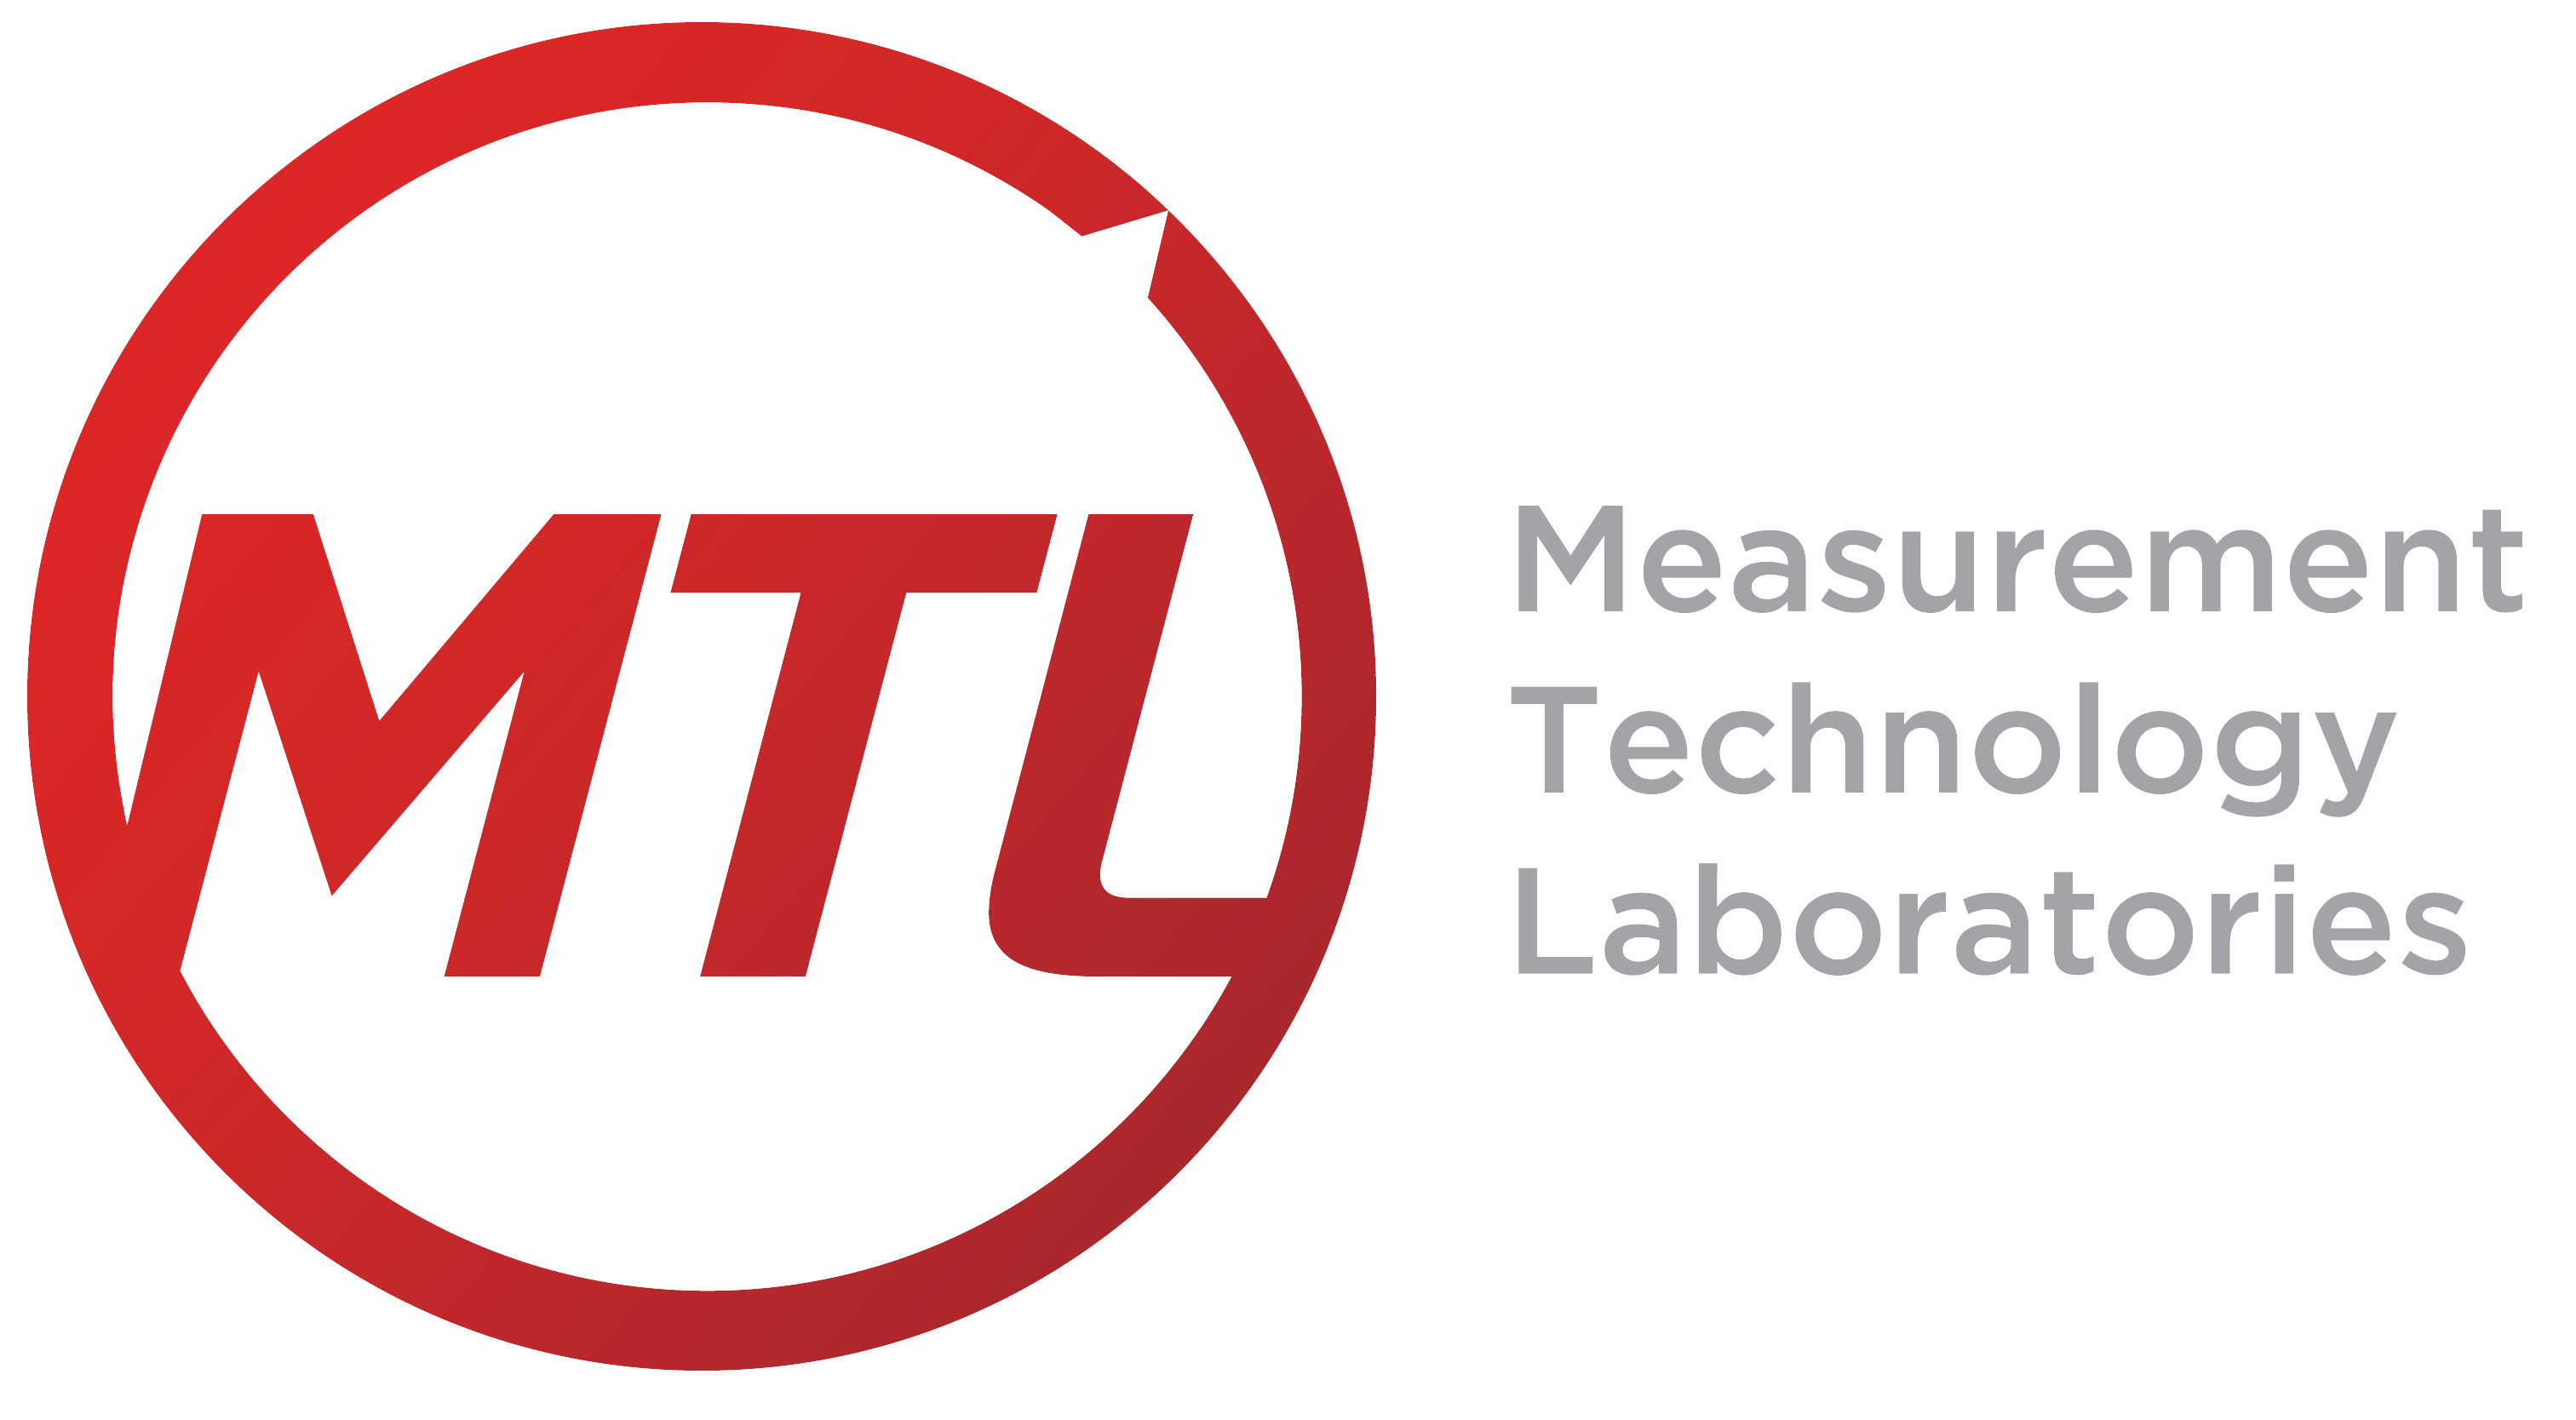 Measurement Technology Laboratories - Measurement Technology Laboratories (MTL) was founded in 1996 to develop state-of-the-art metrology 